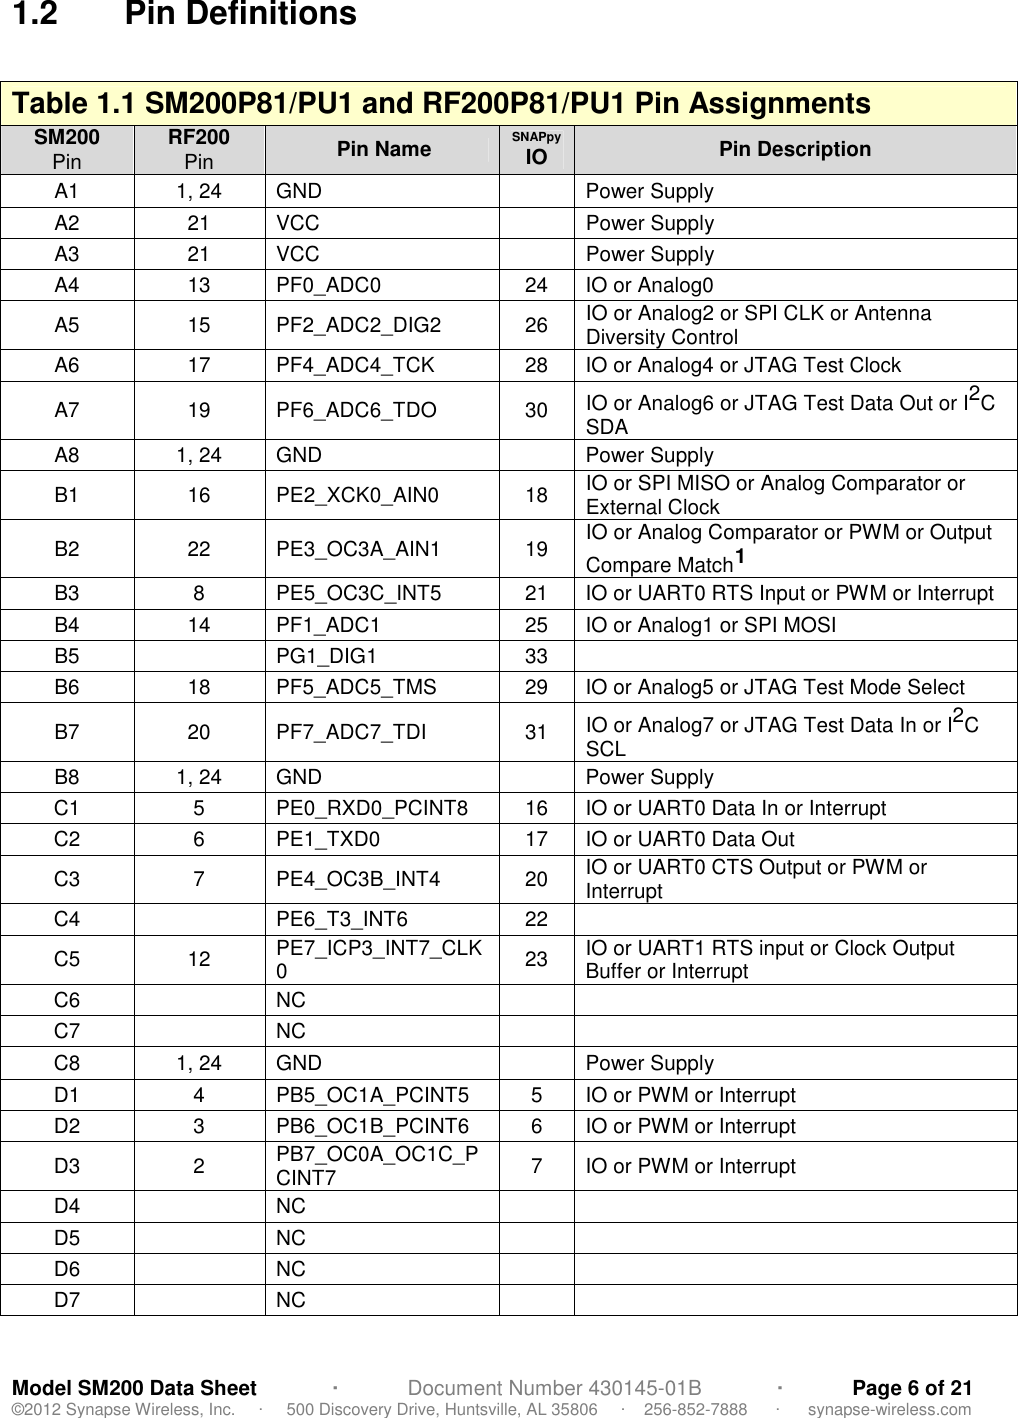 Model SM200 Data Sheet             ·            Document Number 430145-01B             ·            Page 6 of 21 ©2012 Synapse Wireless, Inc.     ·     500 Discovery Drive, Huntsville, AL 35806     ·    256-852-7888      ·      synapse-wireless.com 1.2  Pin Definitions   Table 1.1 SM200P81/PU1 and RF200P81/PU1 Pin Assignments SM200 Pin RF200 Pin  Pin Name SNAPpy IO  Pin Description A1  1, 24  GND    Power Supply  A2  21  VCC    Power Supply A3  21  VCC    Power Supply A4  13  PF0_ADC0  24  IO or Analog0 A5  15  PF2_ADC2_DIG2  26  IO or Analog2 or SPI CLK or Antenna Diversity Control A6  17  PF4_ADC4_TCK  28  IO or Analog4 or JTAG Test Clock A7  19  PF6_ADC6_TDO  30  IO or Analog6 or JTAG Test Data Out or I2C SDA A8  1, 24  GND    Power Supply B1  16  PE2_XCK0_AIN0  18  IO or SPI MISO or Analog Comparator or External Clock B2  22  PE3_OC3A_AIN1  19  IO or Analog Comparator or PWM or Output Compare Match1 B3  8  PE5_OC3C_INT5  21  IO or UART0 RTS Input or PWM or Interrupt B4  14  PF1_ADC1  25  IO or Analog1 or SPI MOSI B5    PG1_DIG1  33   B6  18  PF5_ADC5_TMS  29  IO or Analog5 or JTAG Test Mode Select B7  20  PF7_ADC7_TDI  31  IO or Analog7 or JTAG Test Data In or I2C SCL B8  1, 24  GND    Power Supply C1  5  PE0_RXD0_PCINT8  16  IO or UART0 Data In or Interrupt  C2  6  PE1_TXD0  17  IO or UART0 Data Out C3  7  PE4_OC3B_INT4  20  IO or UART0 CTS Output or PWM or Interrupt C4    PE6_T3_INT6  22   C5  12  PE7_ICP3_INT7_CLK0  23  IO or UART1 RTS input or Clock Output Buffer or Interrupt C6    NC     C7    NC     C8  1, 24  GND    Power Supply D1  4  PB5_OC1A_PCINT5  5  IO or PWM or Interrupt  D2  3  PB6_OC1B_PCINT6  6  IO or PWM or Interrupt  D3  2  PB7_OC0A_OC1C_PCINT7  7  IO or PWM or Interrupt D4    NC     D5    NC     D6    NC     D7    NC     